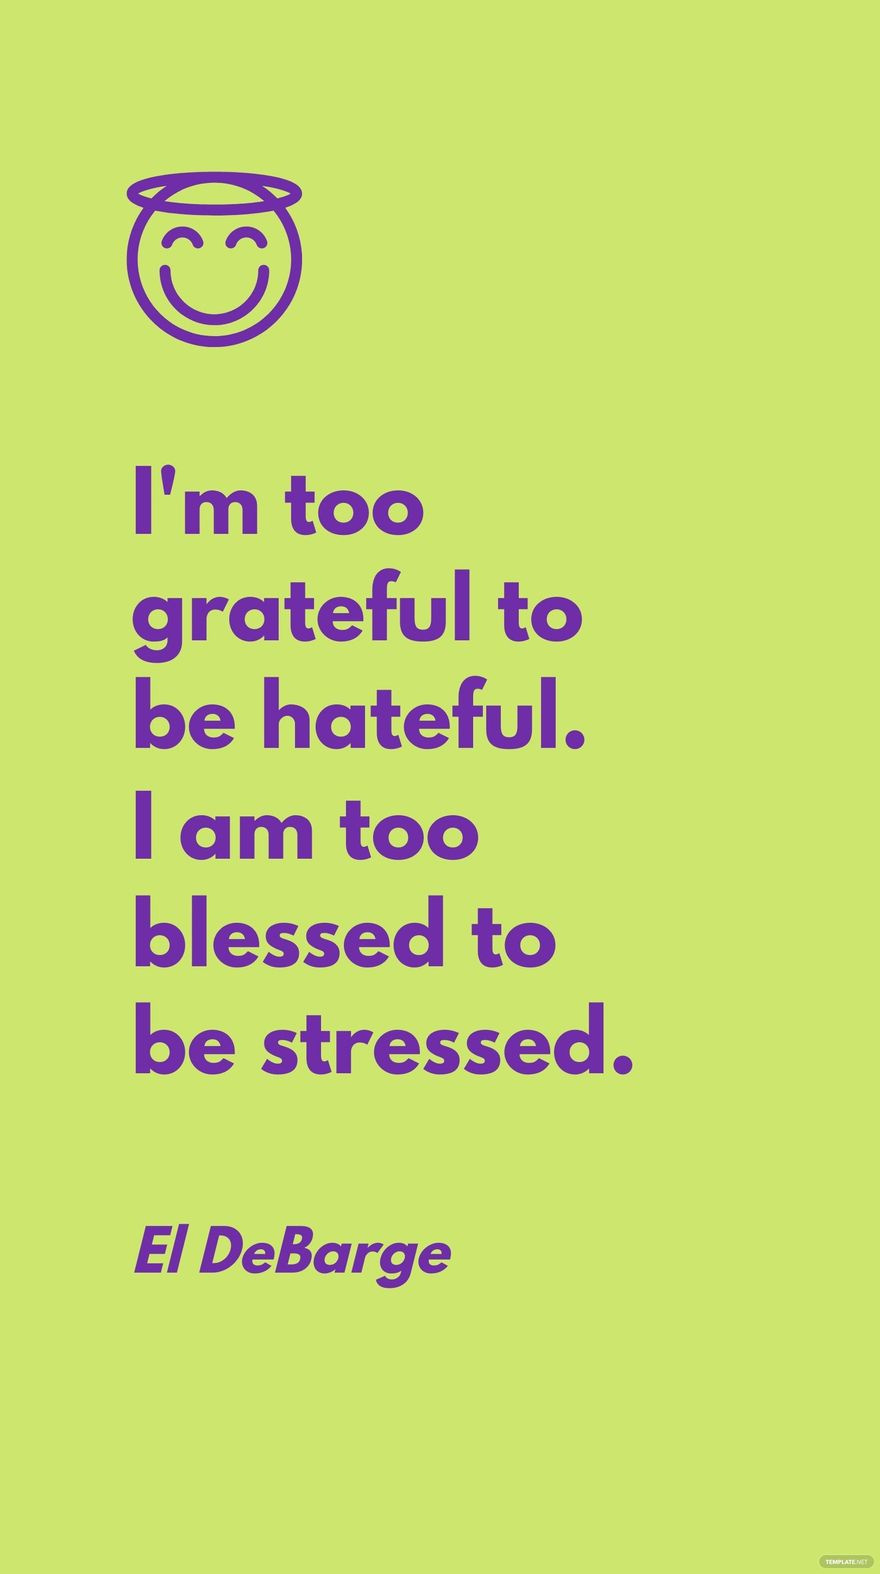 El DeBarge - I'm too grateful to be hateful. I am too blessed to be stressed. in JPG